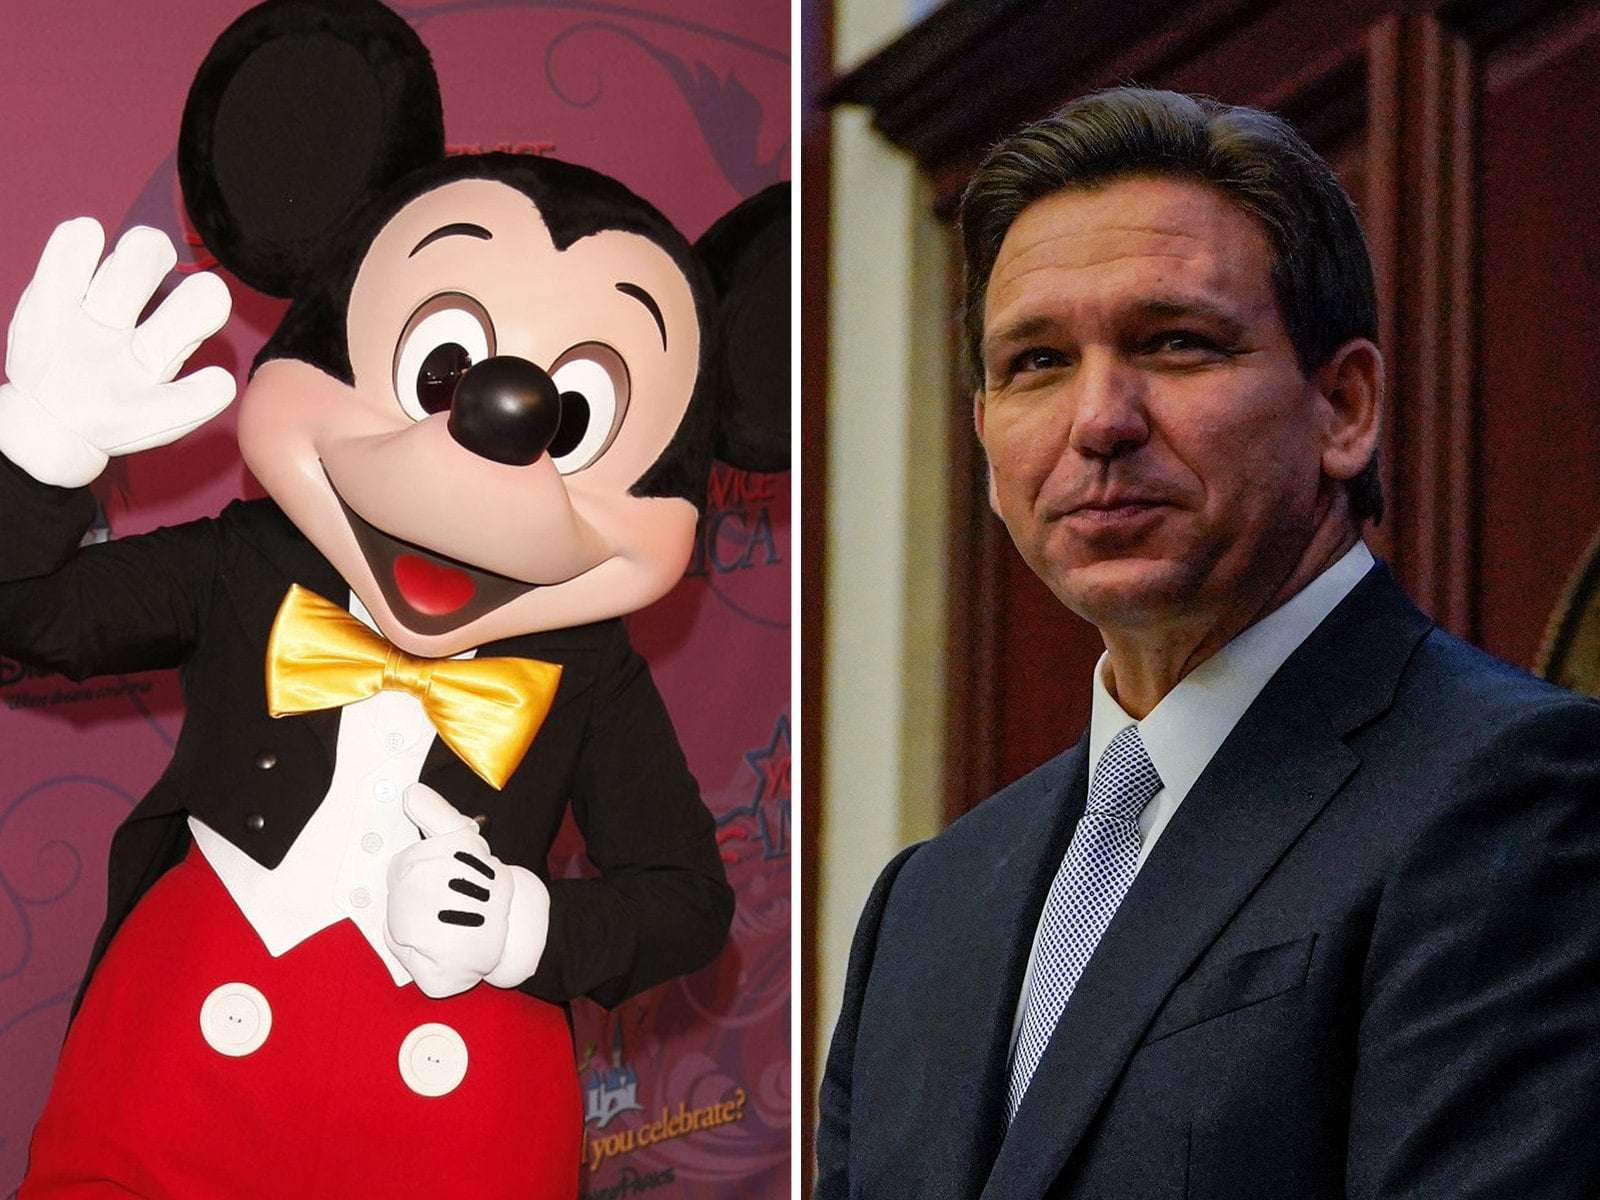 image for Disney World Defies Ron DeSantis by Hosting Gay Rights Summit in Florida